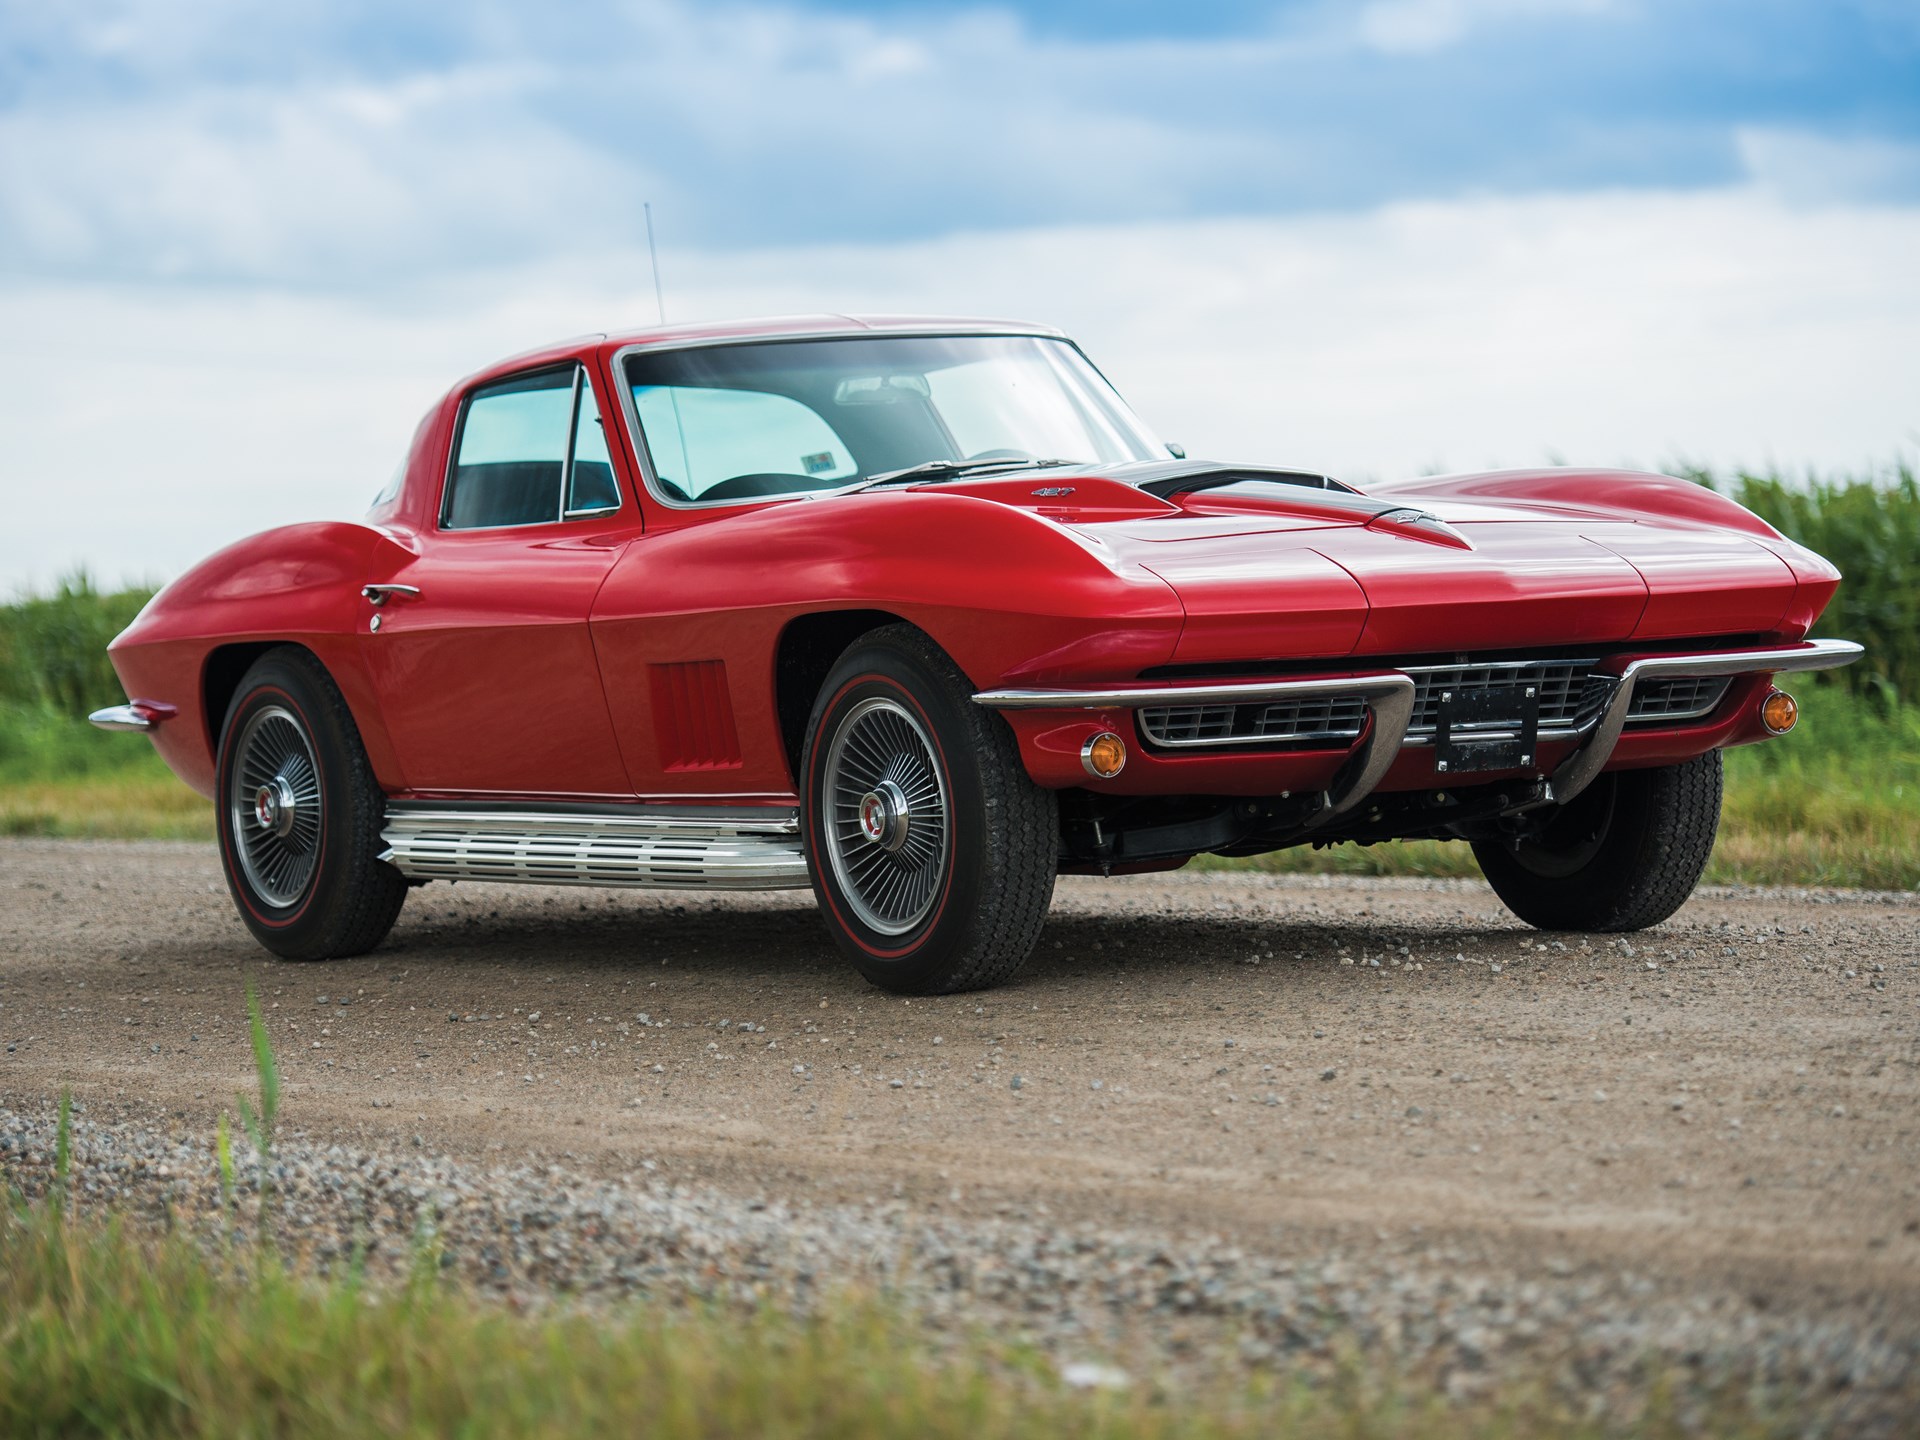 RM Sotheby's - 1967 Chevrolet Corvette Sting Ray 427/435 Coupe ...